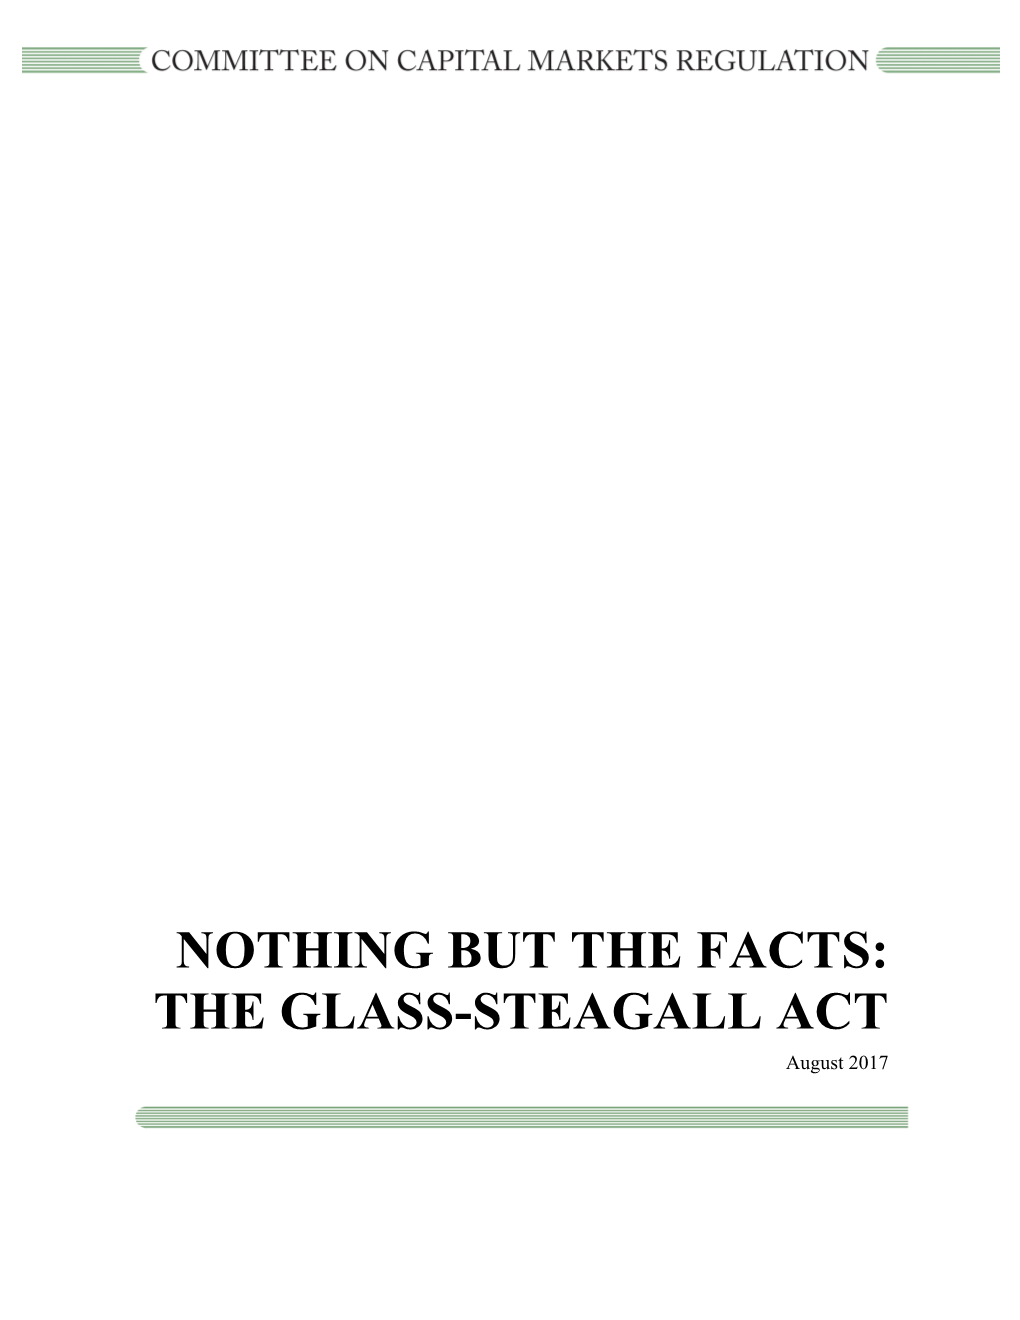 NOTHING but the FACTS: the GLASS-STEAGALL ACT August 2017